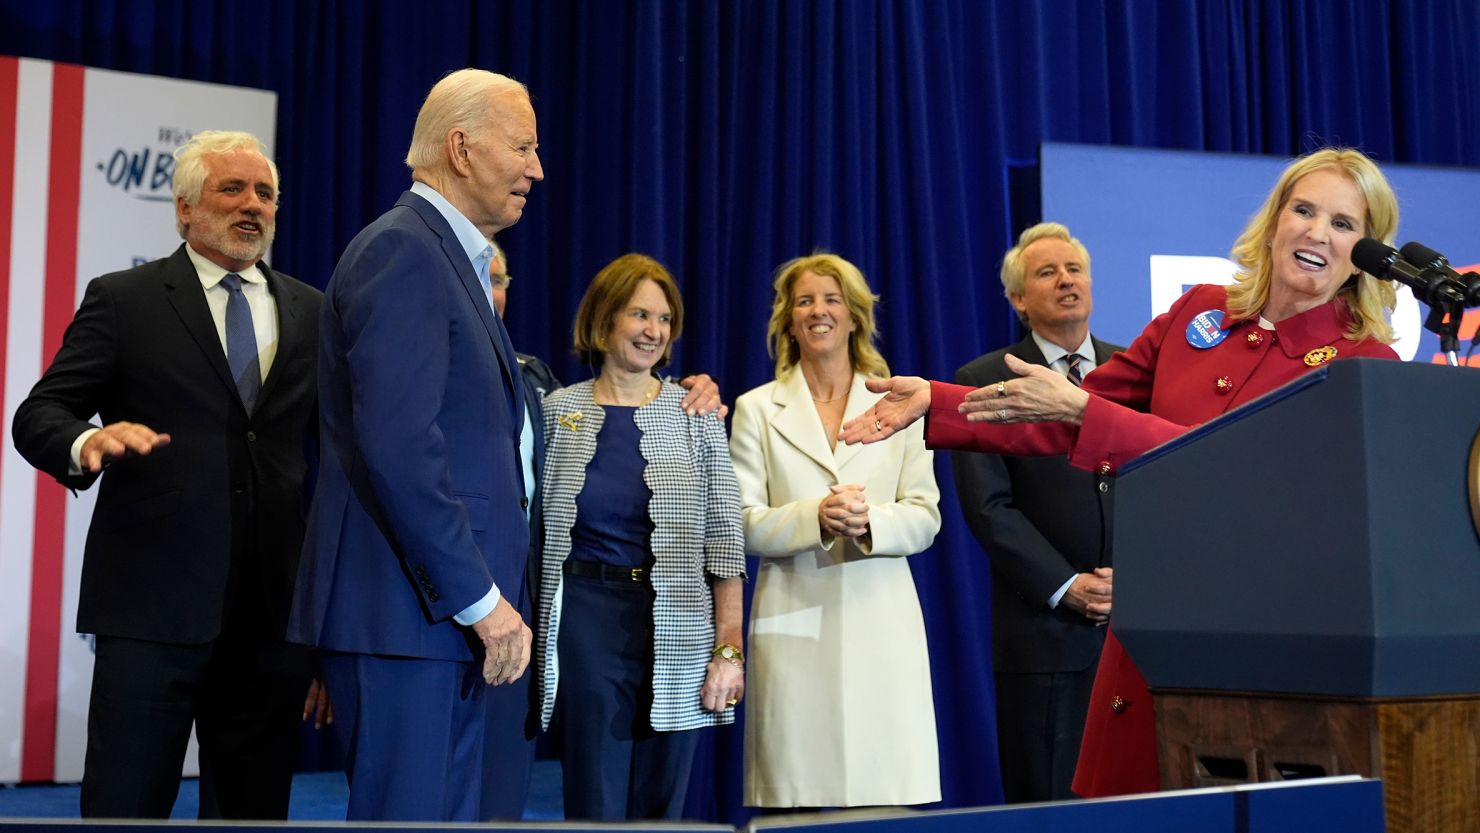 Kerry Kennedy, right, along with members of the Kennedy family, introduces President Joe Biden, second from left, at a campaign event on April 18, in Philadelphia.